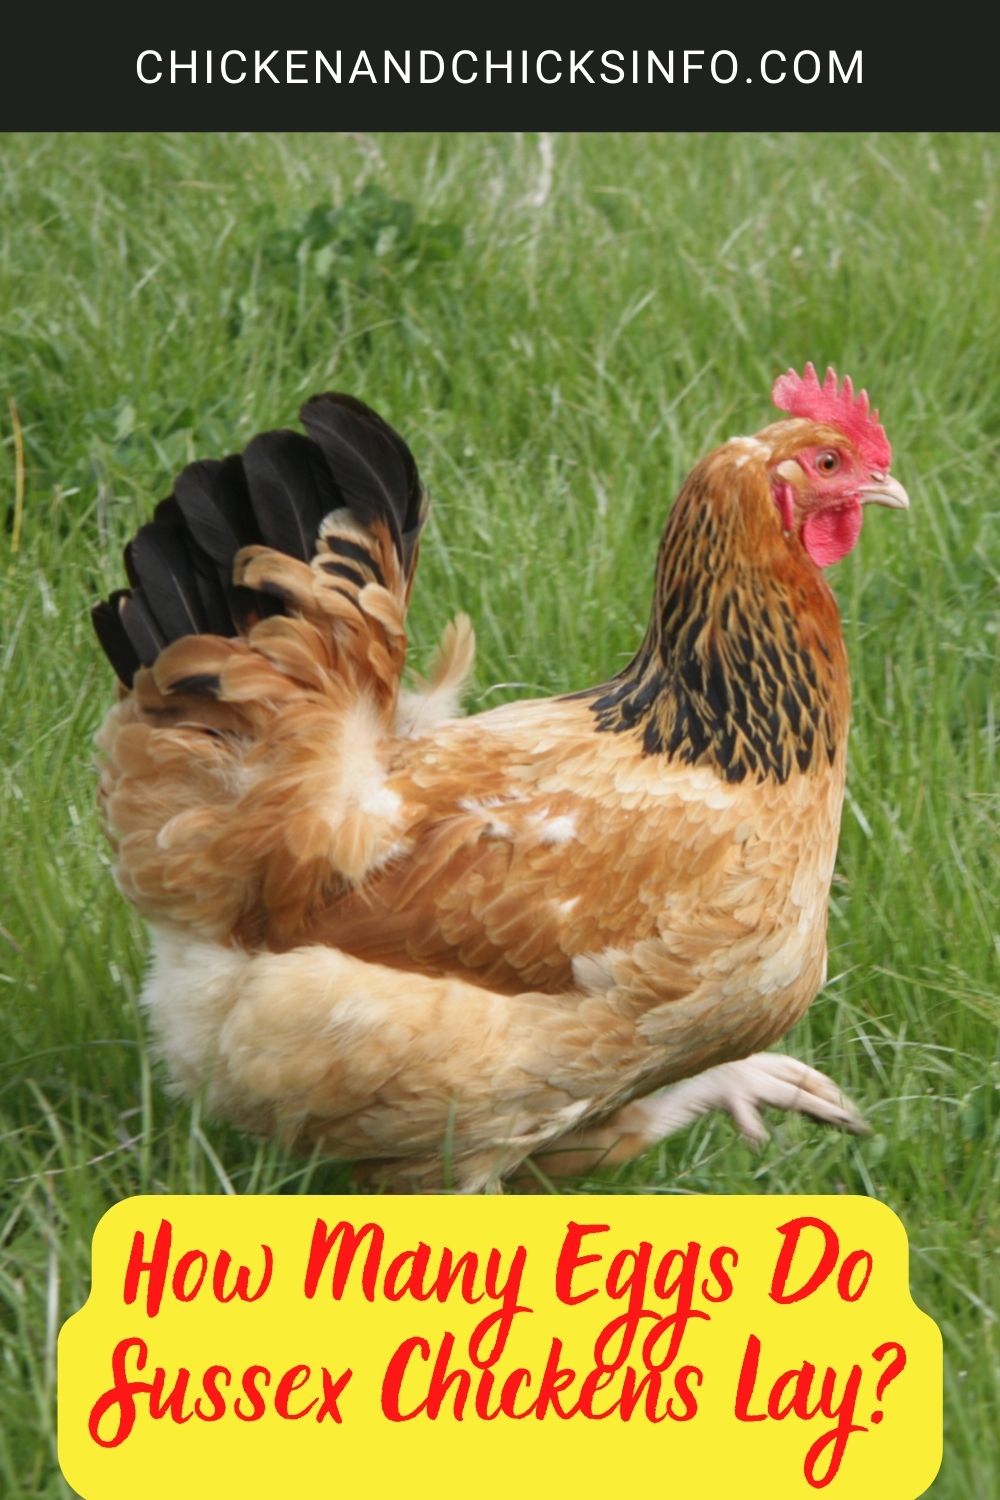 How Many Eggs Do Sussex Chickens Lay? poster.
